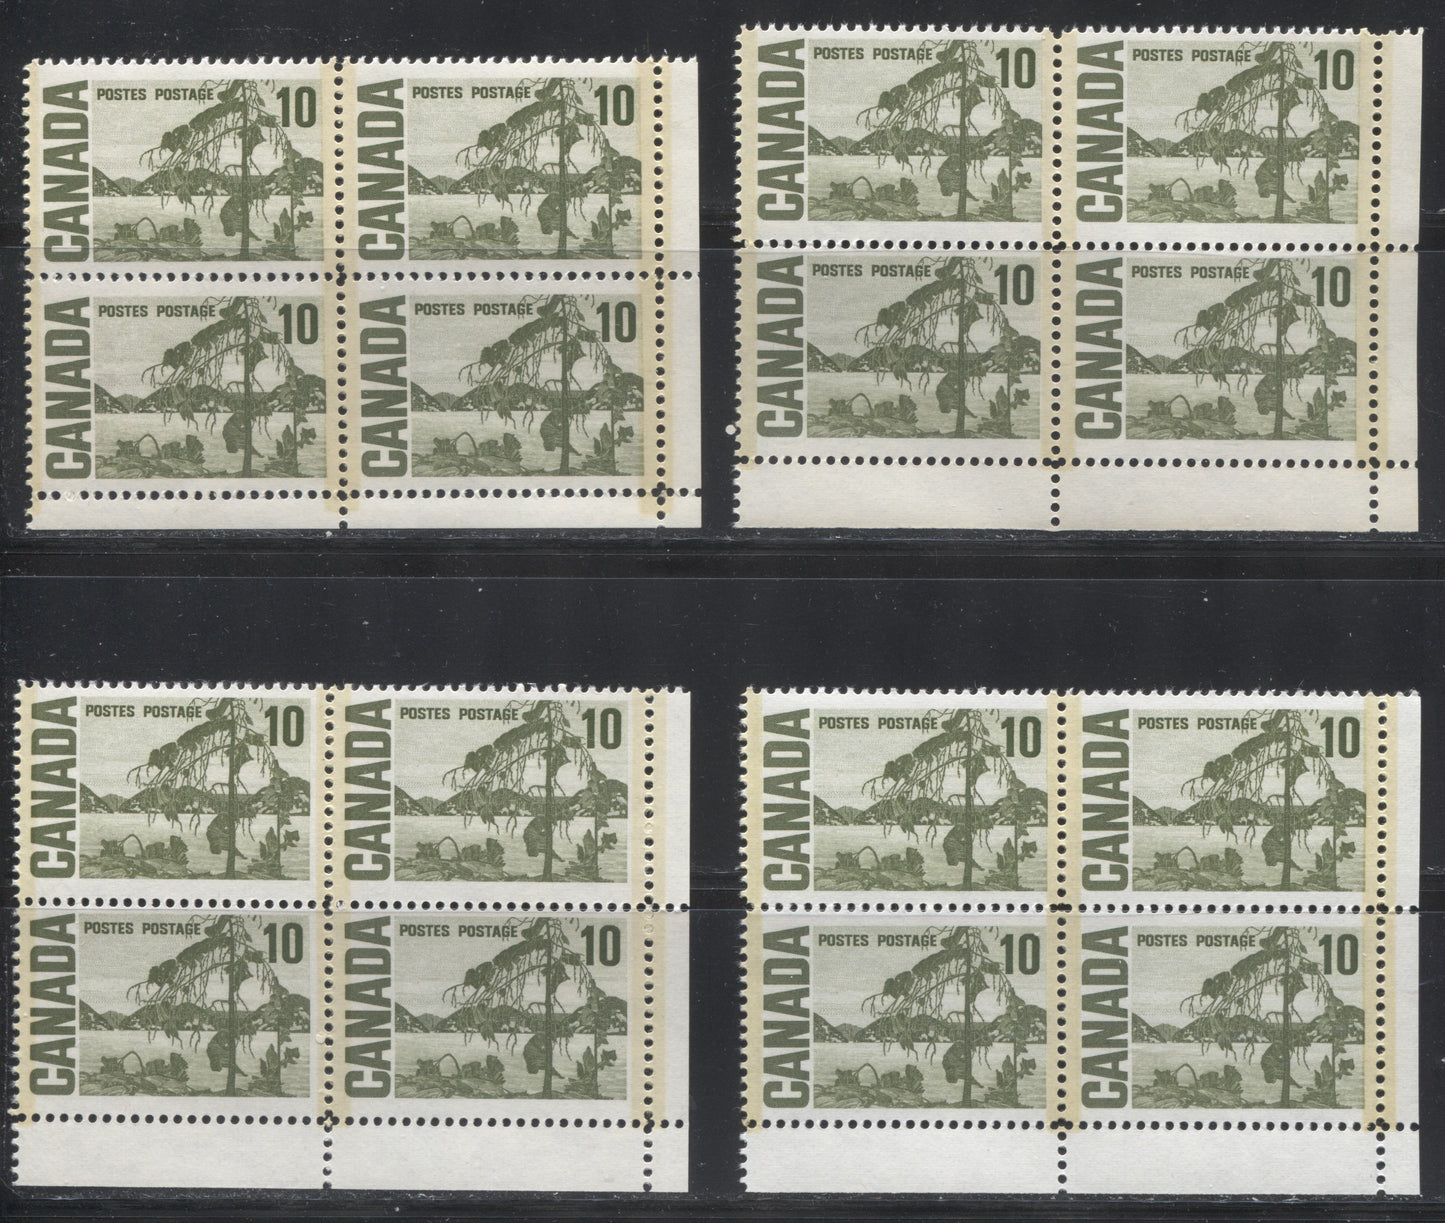 Lot 123 Canada #462piii 10c Olive Green Jack Pine, 1967-1973 Centennial Definitive Issue, Four F/VFNH UR GT2 Tagged Field Stock Blocks Of 4 On LF & MF Vertical Wove Paper Fluorescent Inks, With PVA Gums And Different Tagging Intensities